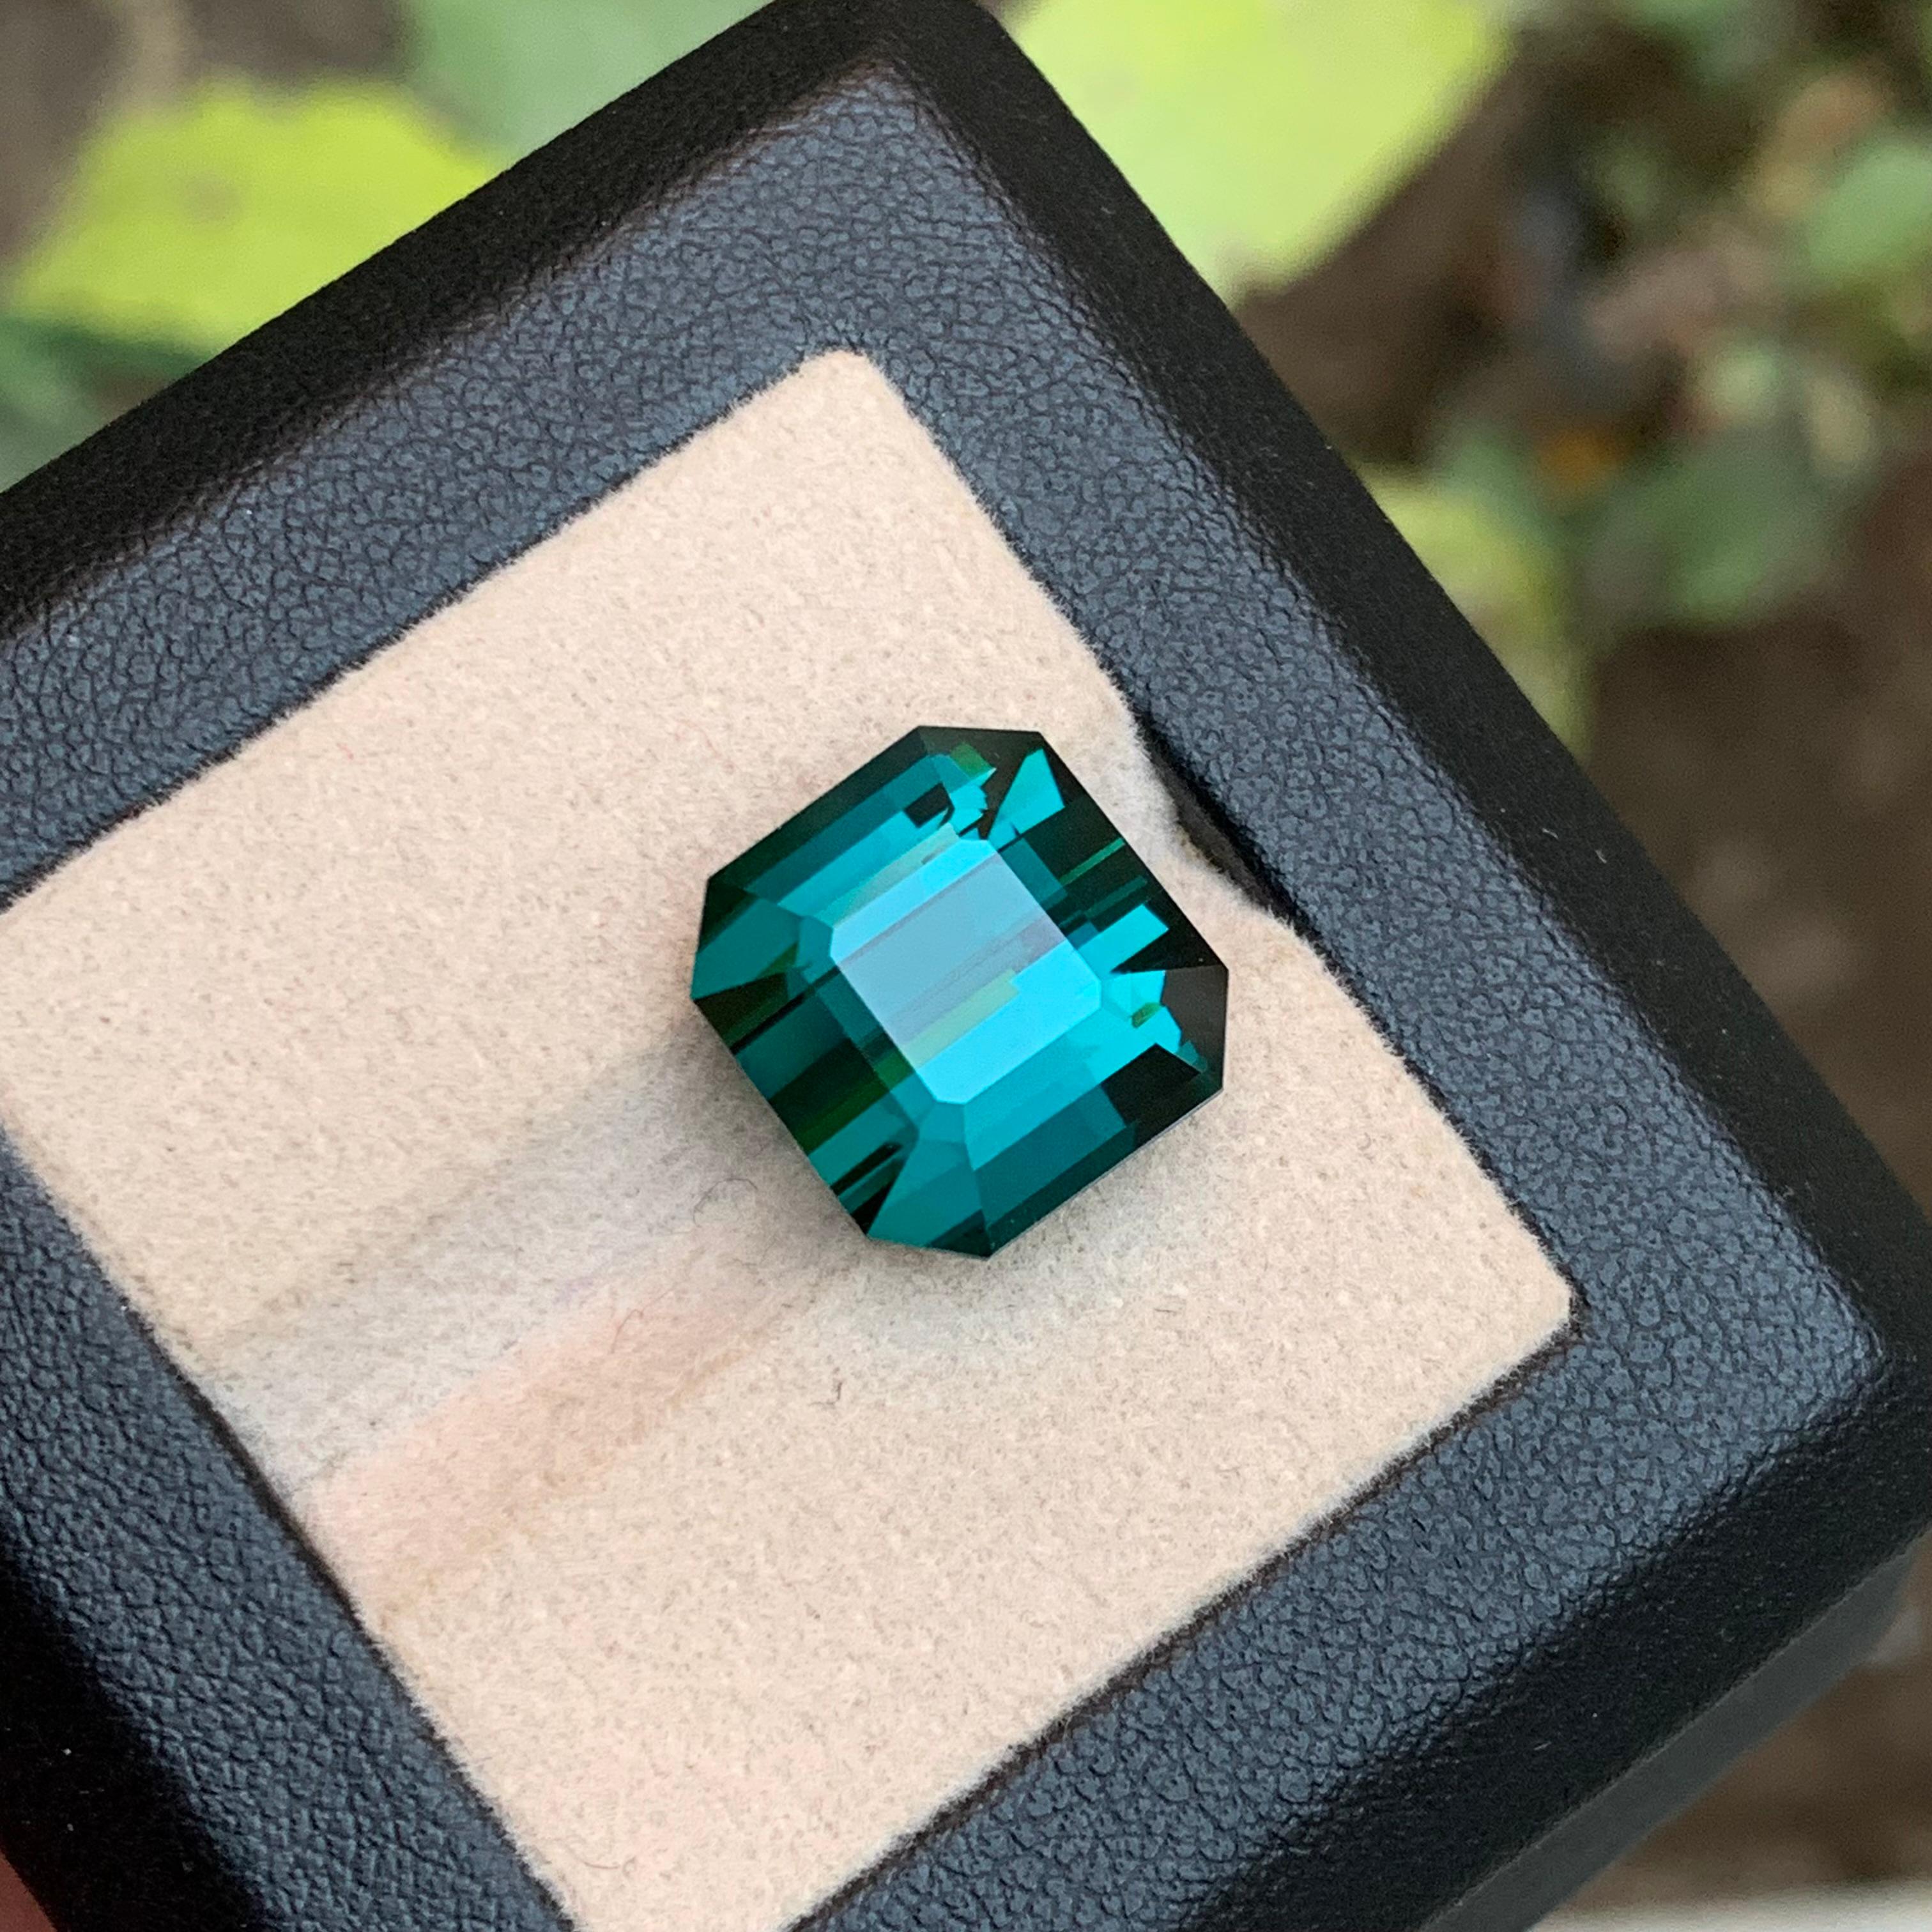 Rare Teal Blue Flawless Tourmaline Gemstone, 15.30 Ct Emerald Cut-Ring/Pendant For Sale 8